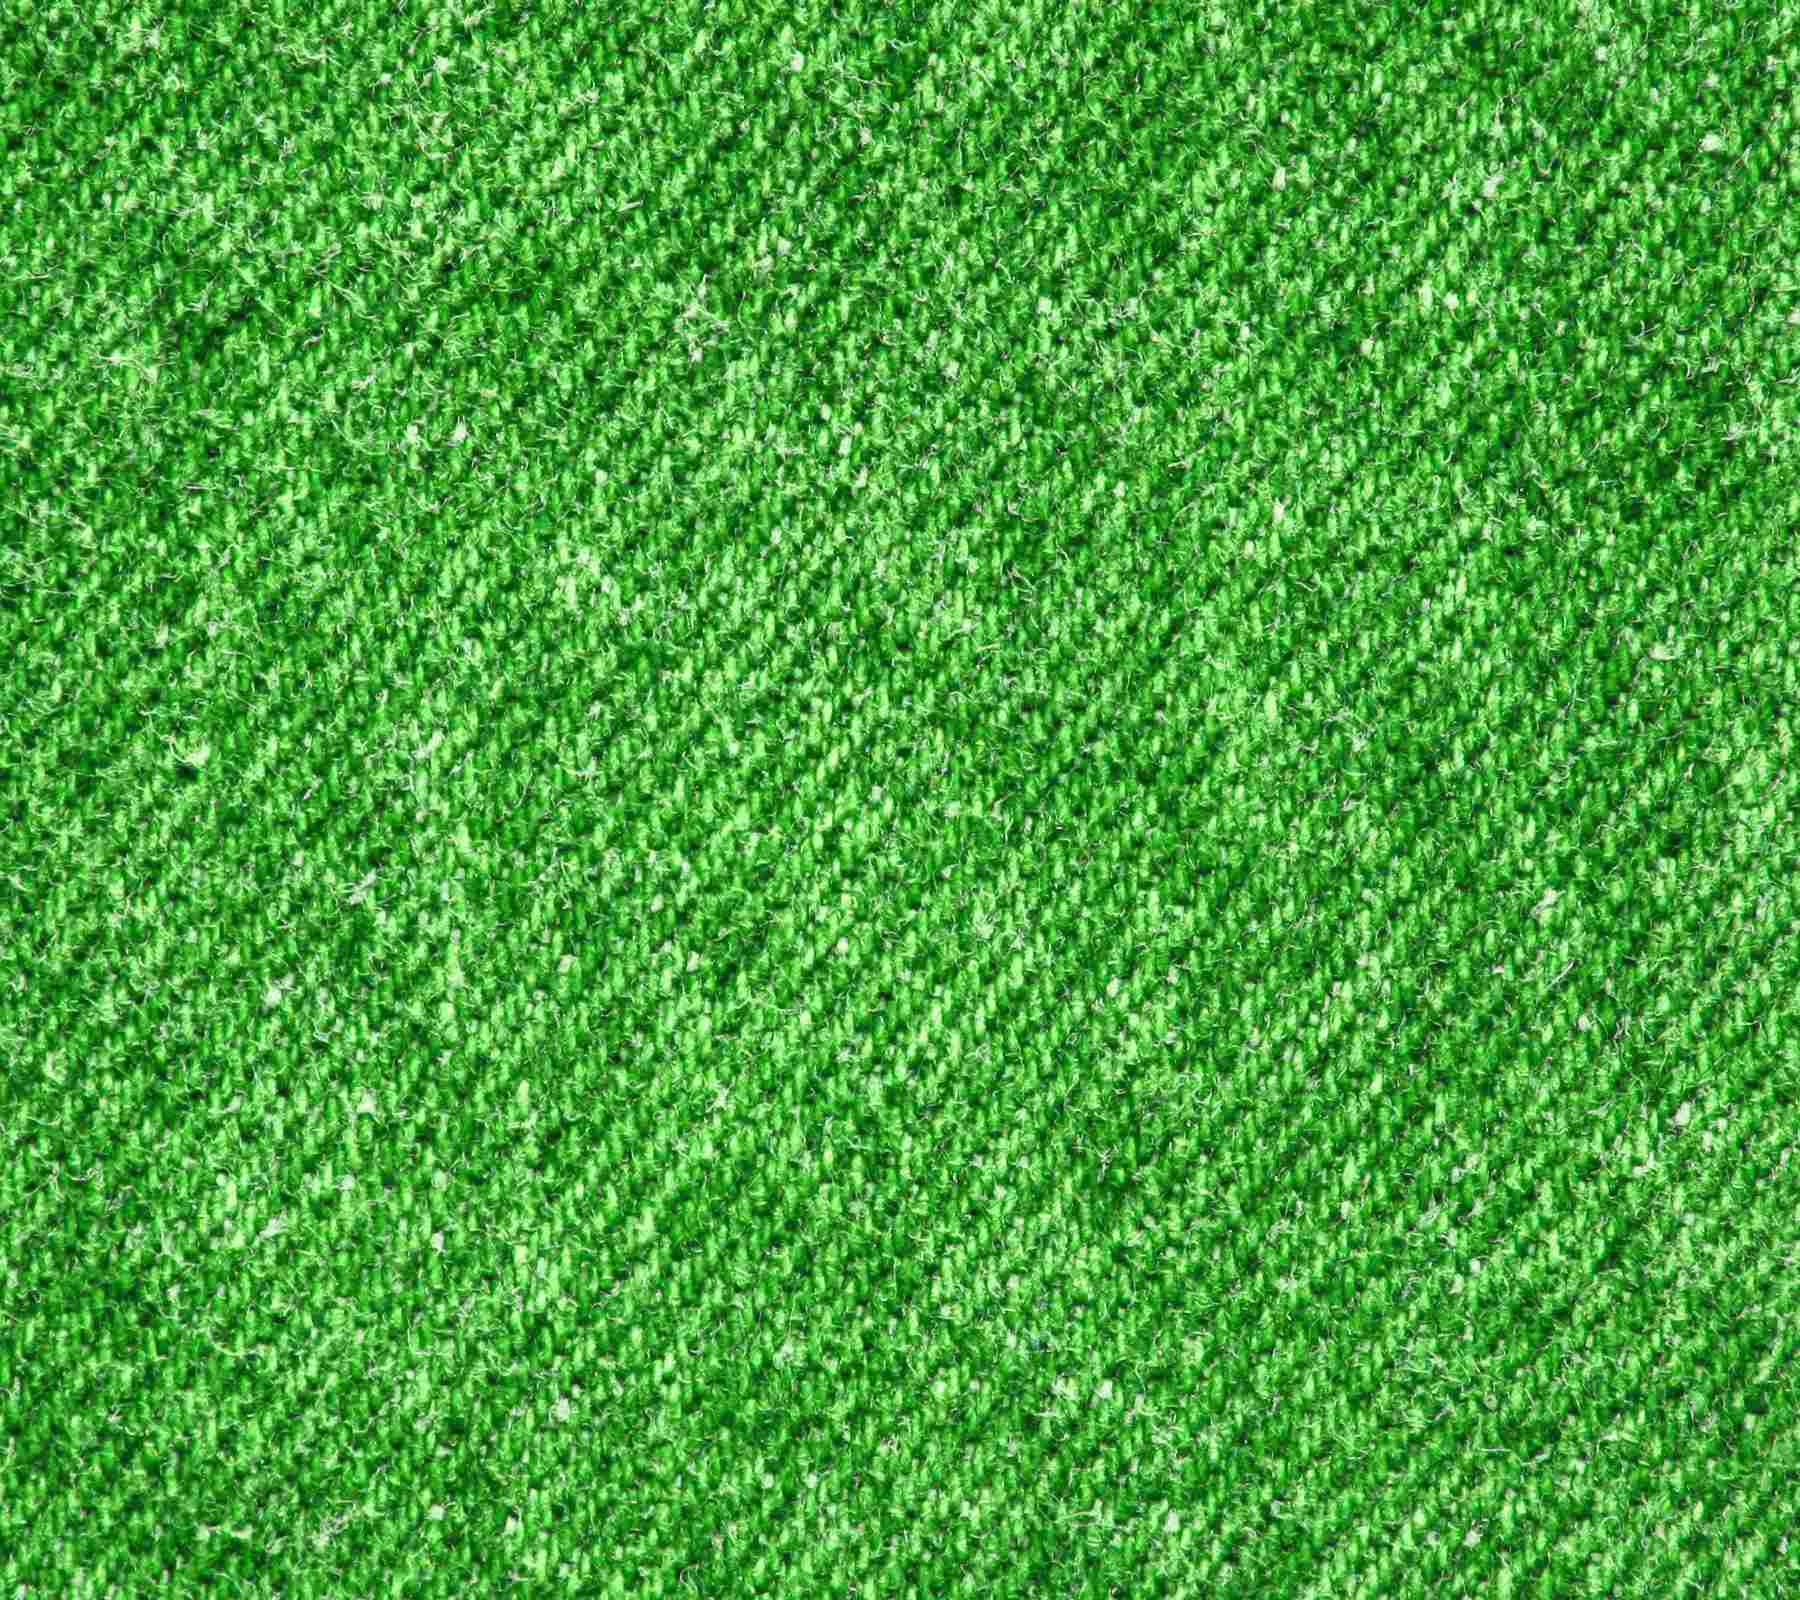 Bright Green Fabric Background Image, Wallpaper or Texture free for any ...